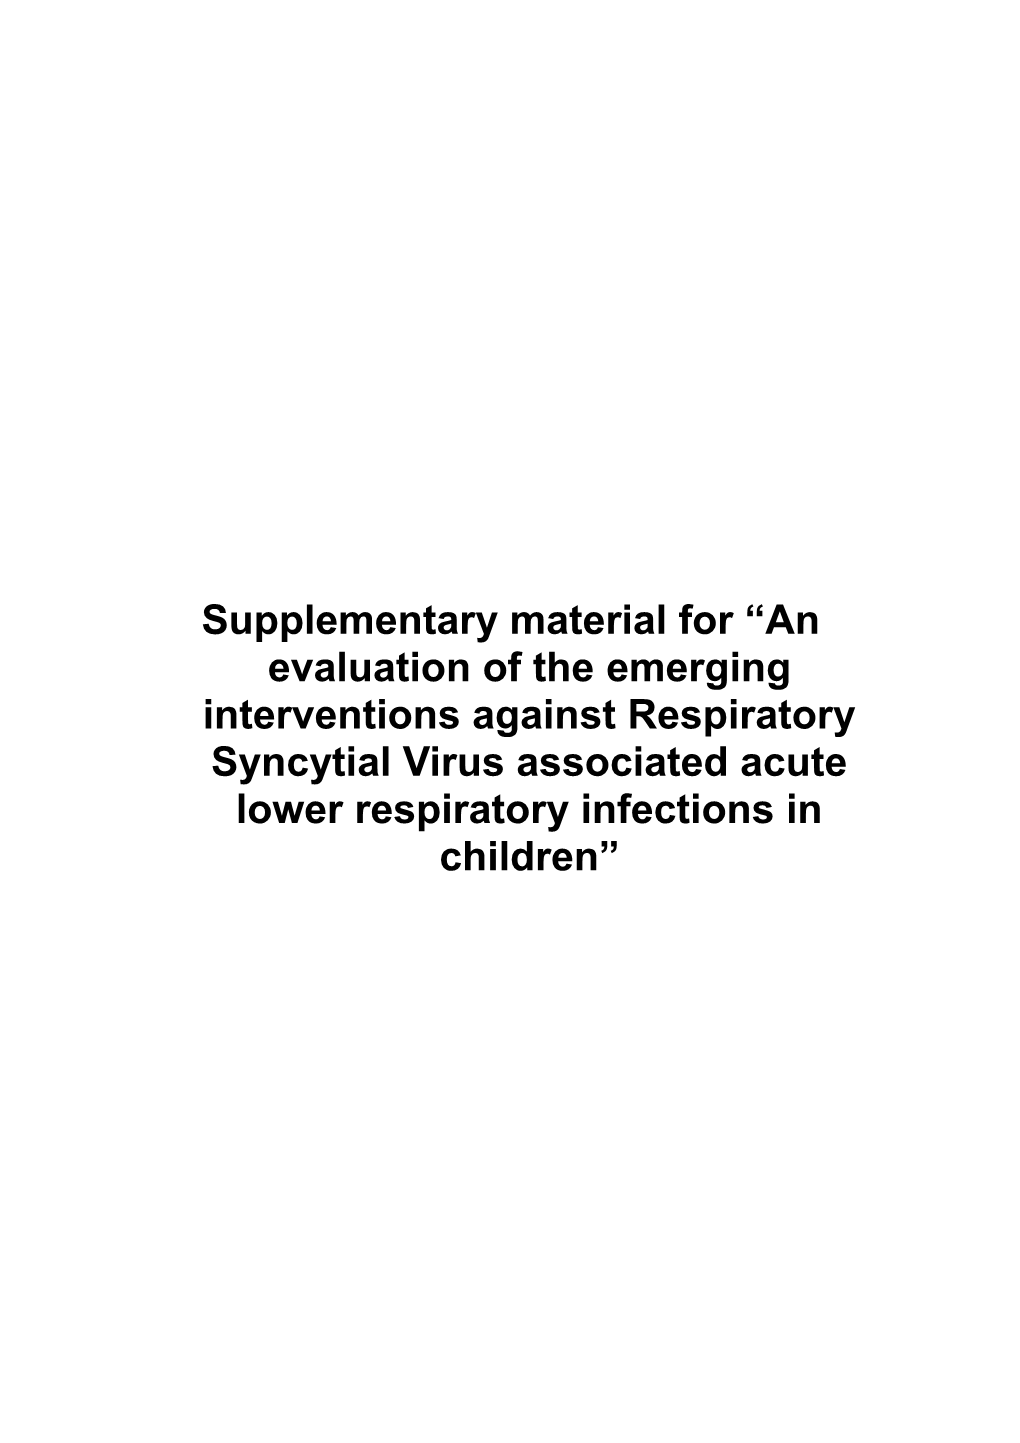 Supplementary Material for an Evaluation of the Emerging Interventions Against Respiratory